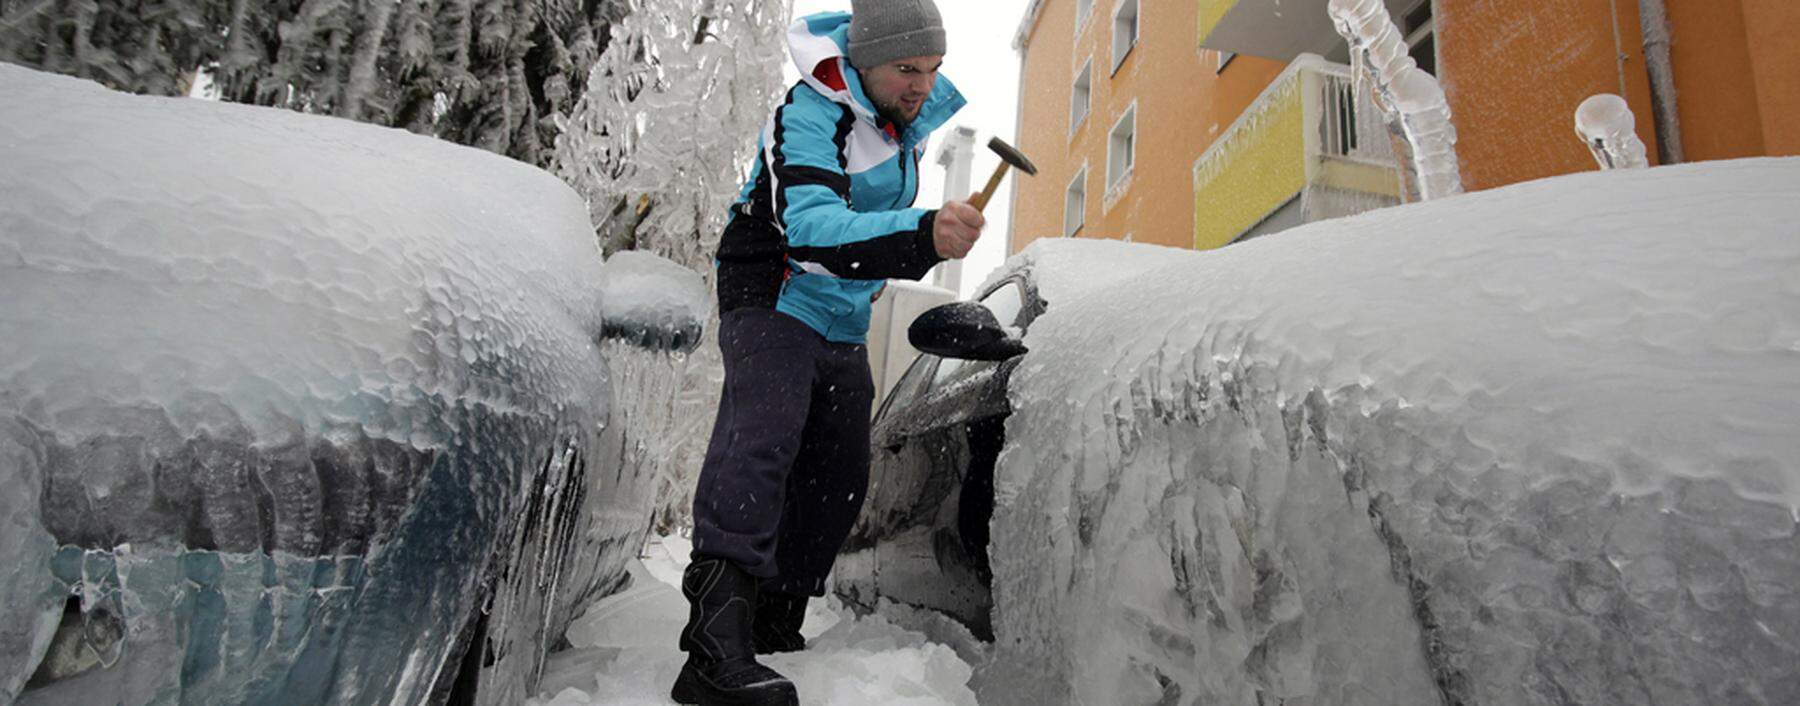 Man removes ice from an ice-covered car with a hammer in Postojna